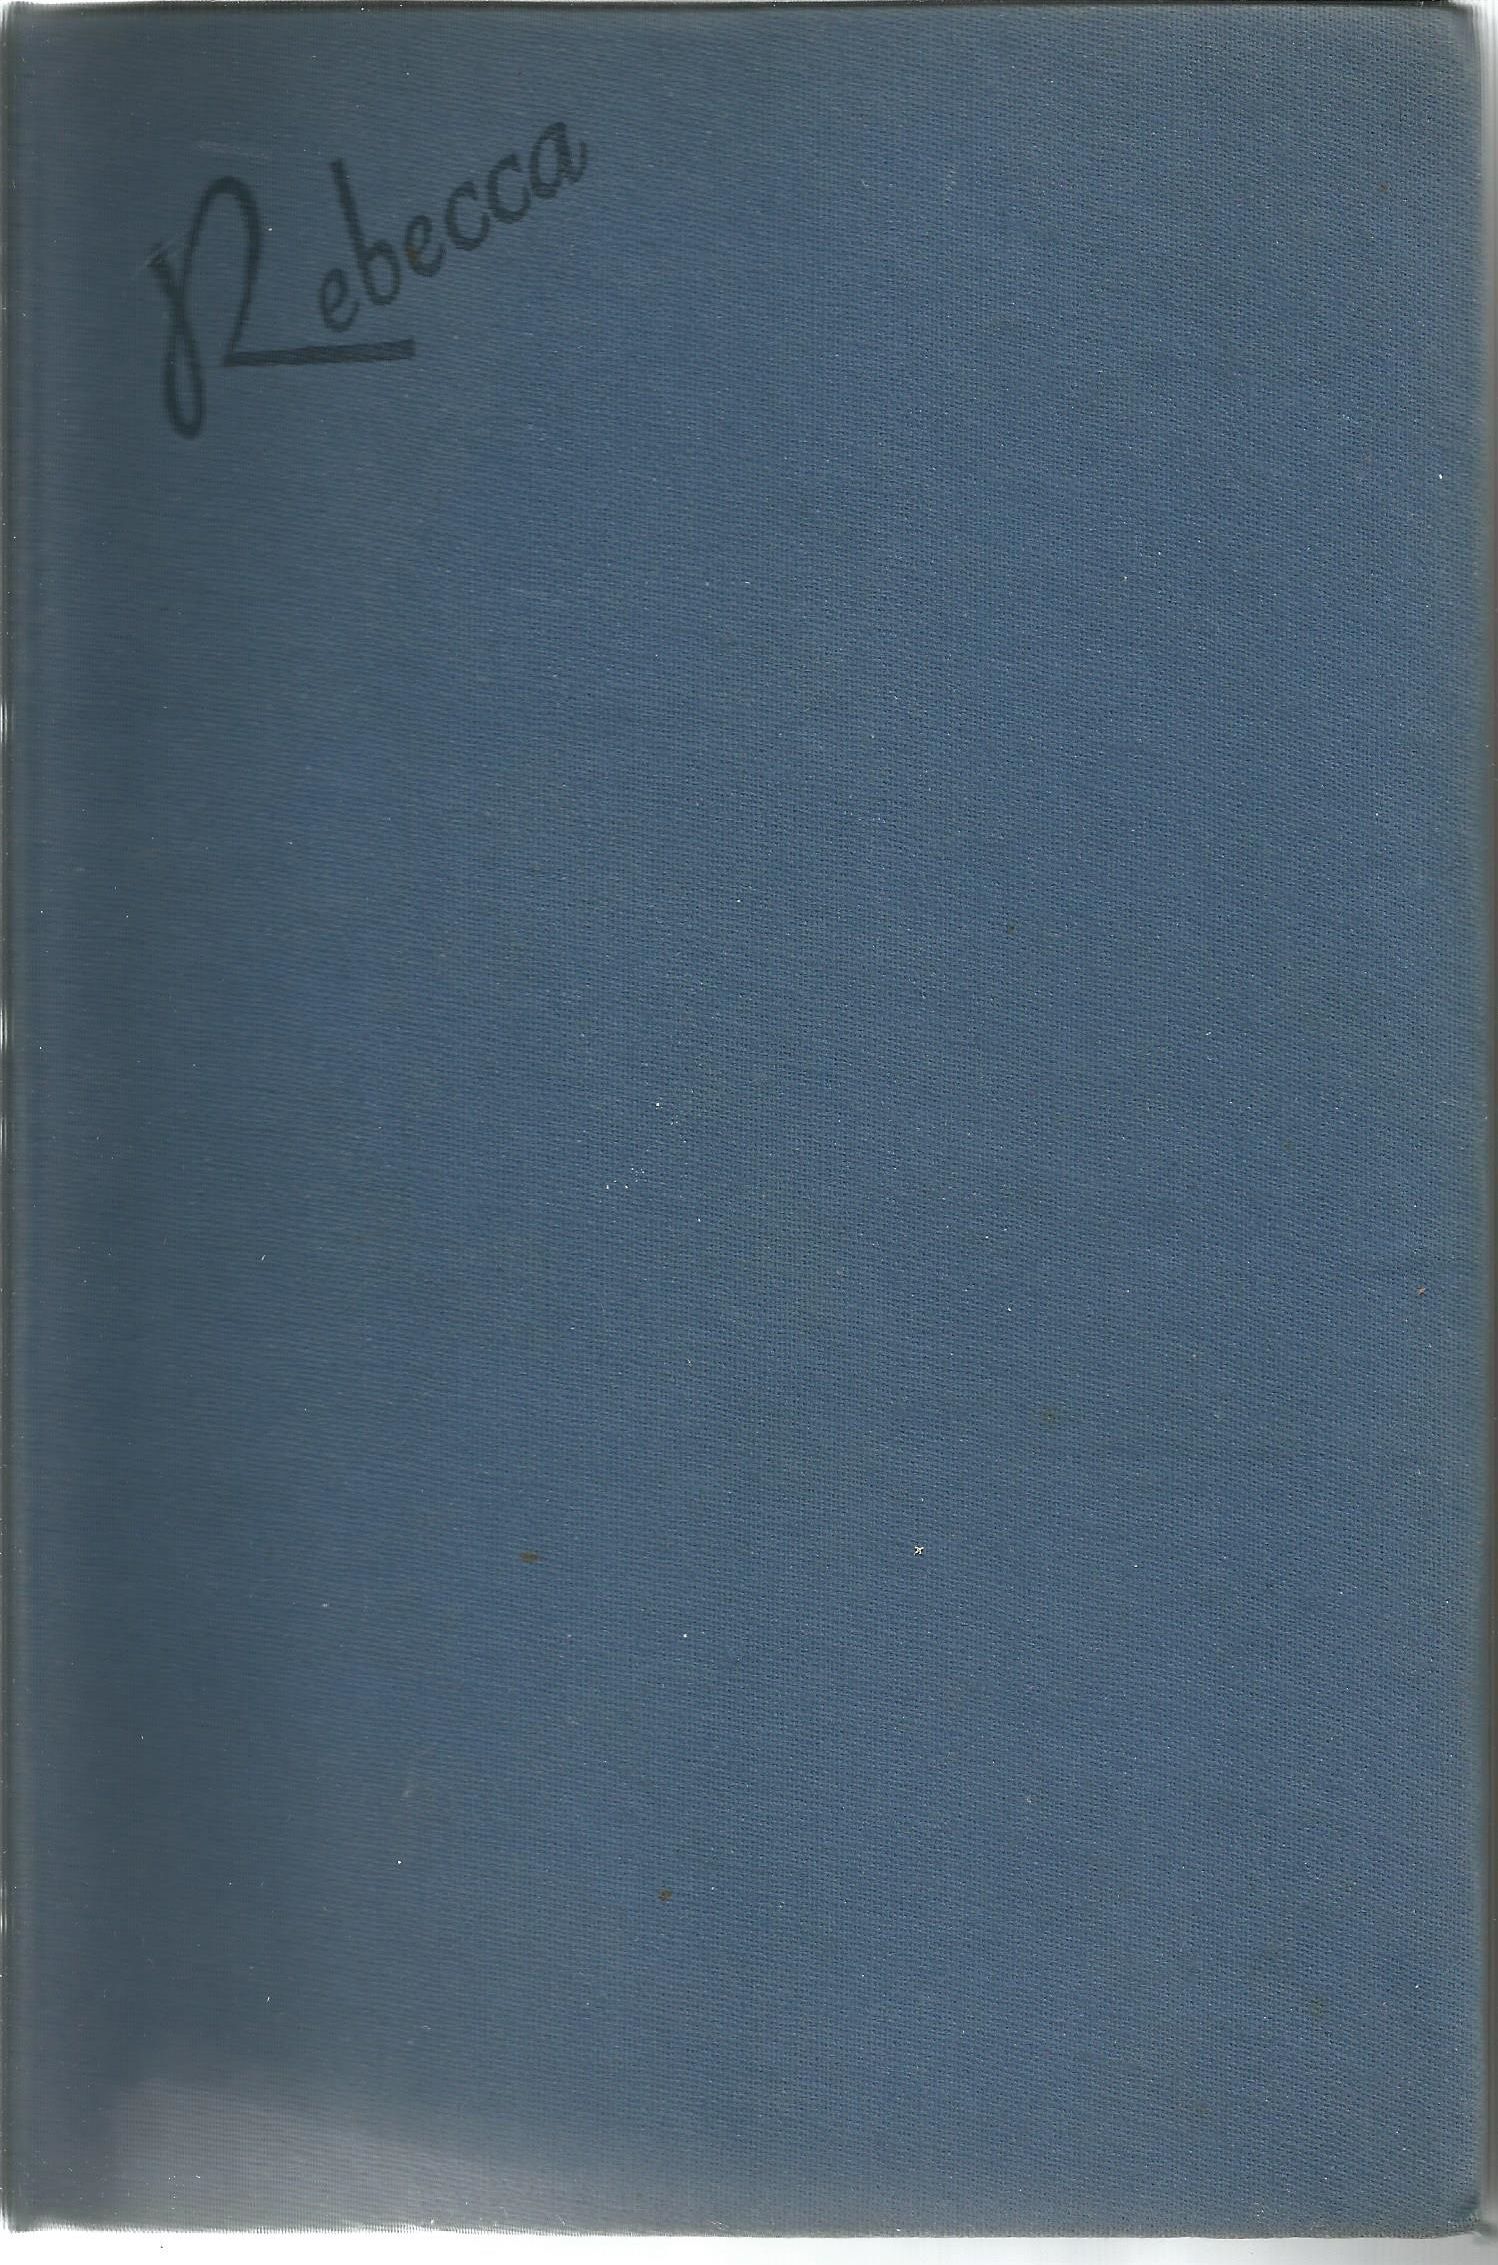 Rebecca by Daphne Du Maurier. Hardback book with dedication - To My Wife dated 12 February 1943- 302